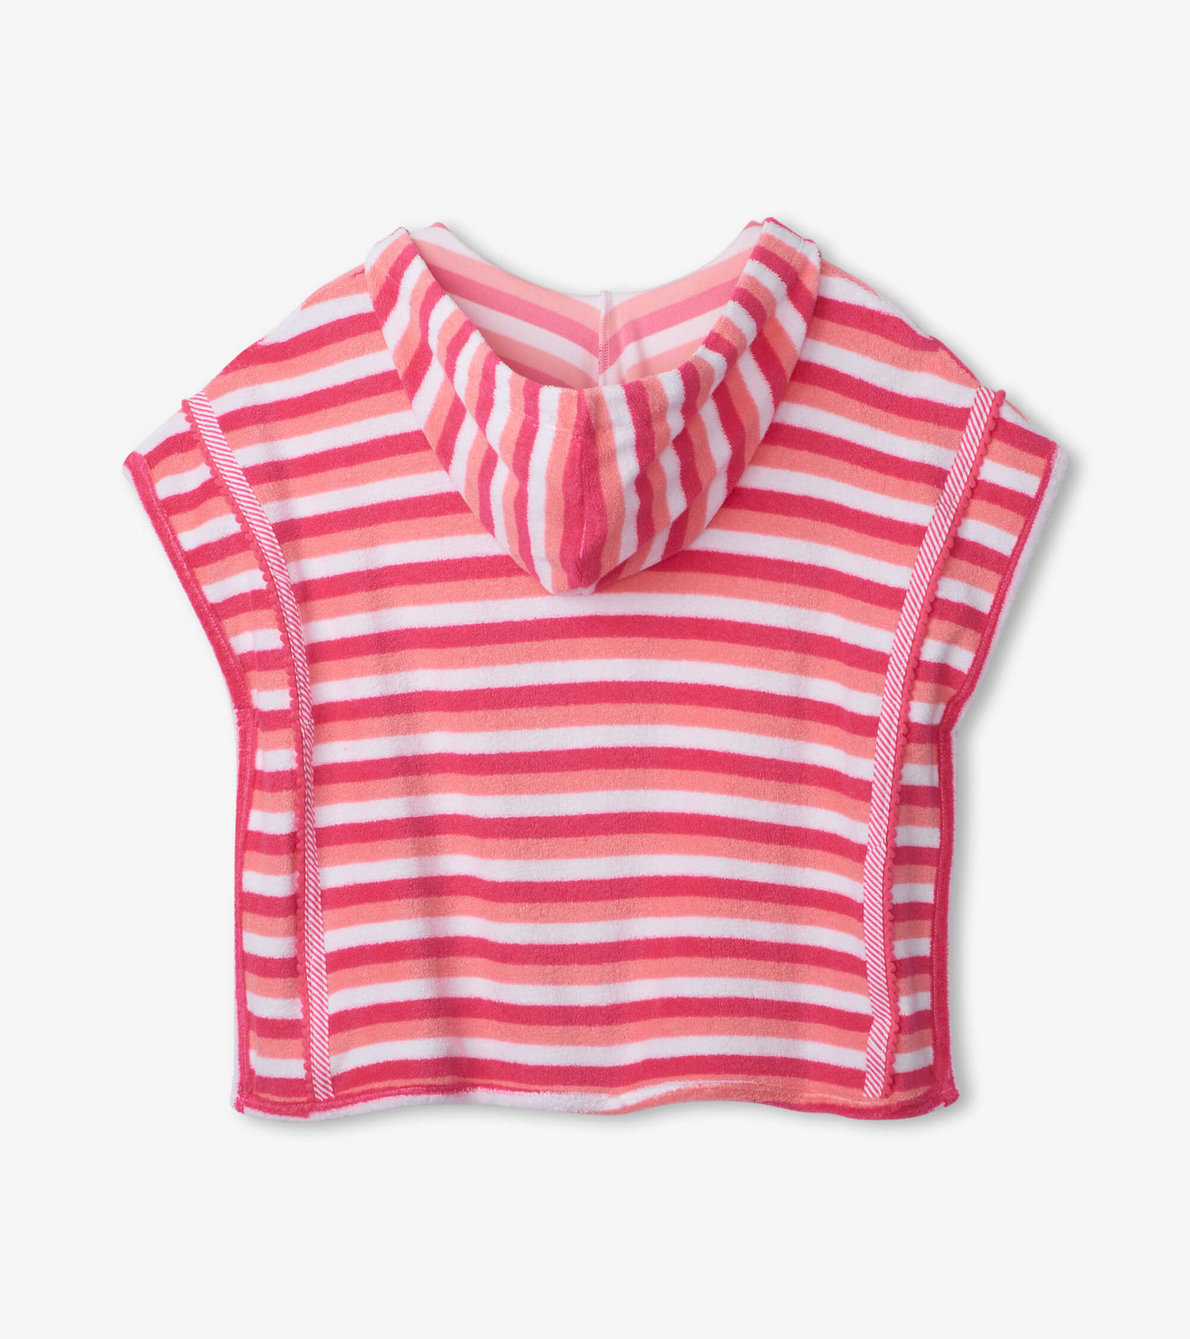 View larger image of Cotton Candy Stripes Hooded Terry Cover Up